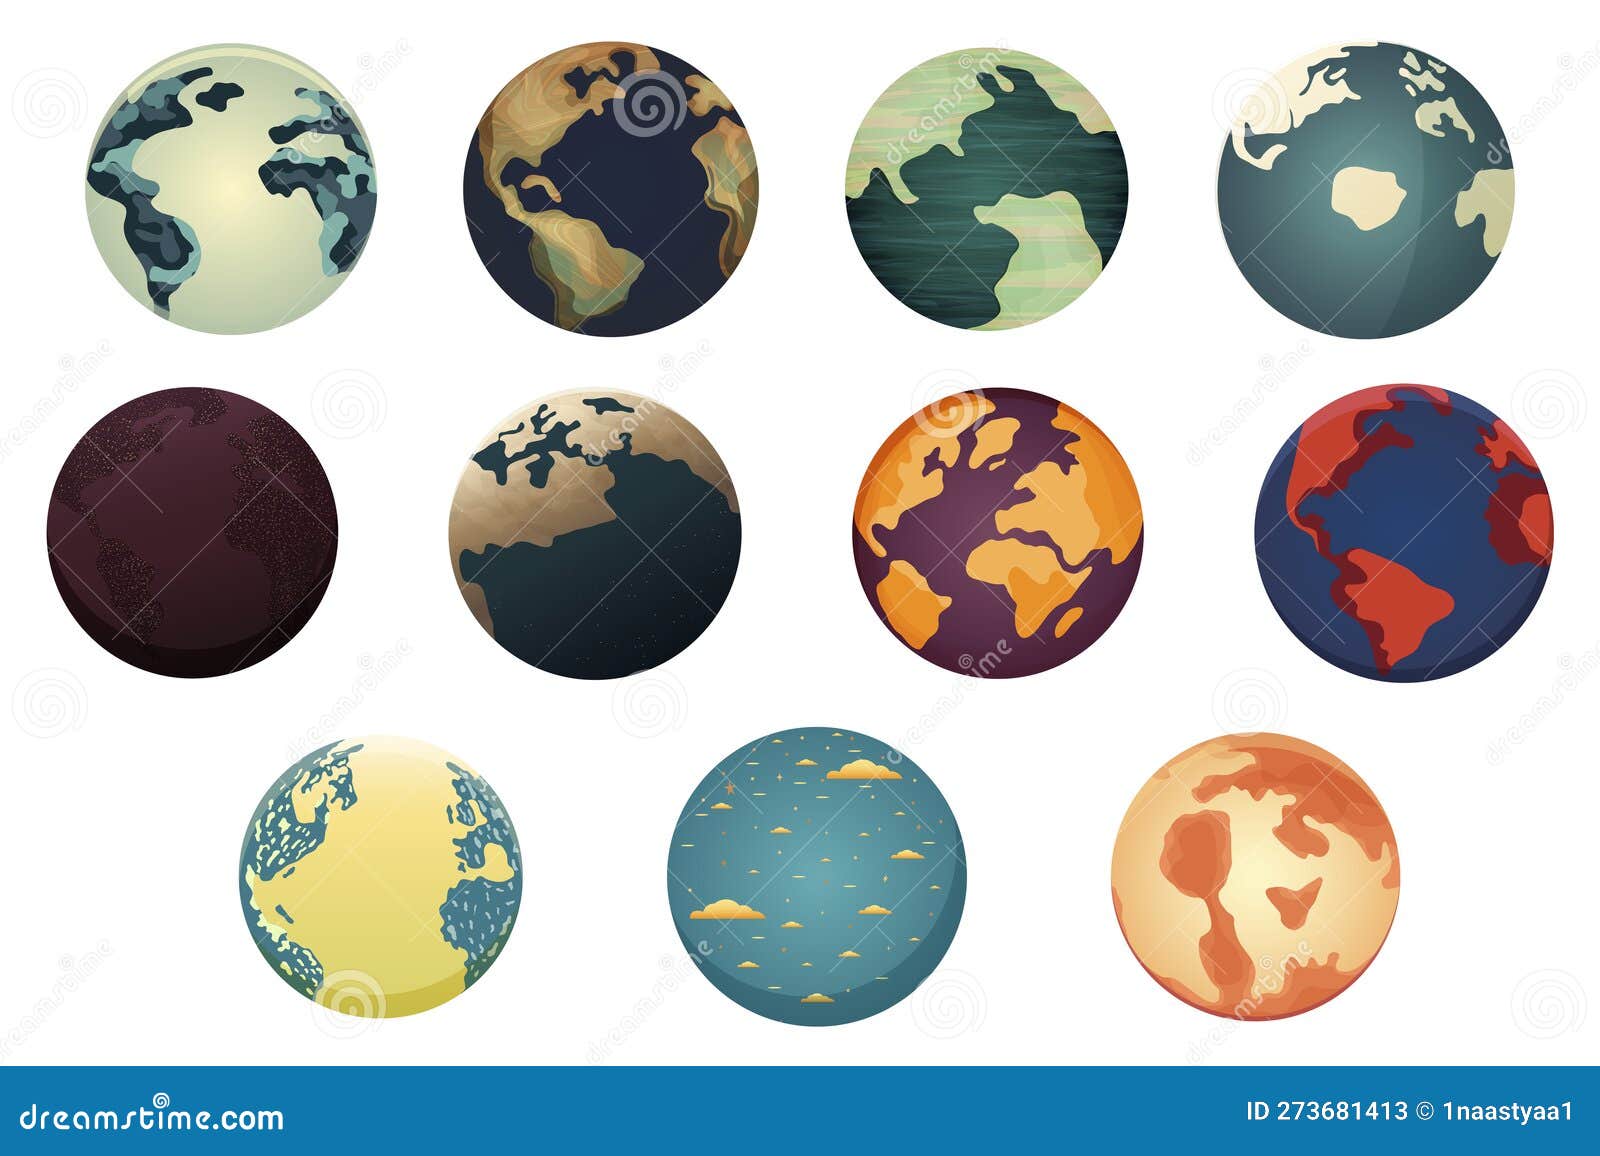 11 Illustrations of Planets , Abstraction, Space Theme, Cartoon Bright ...